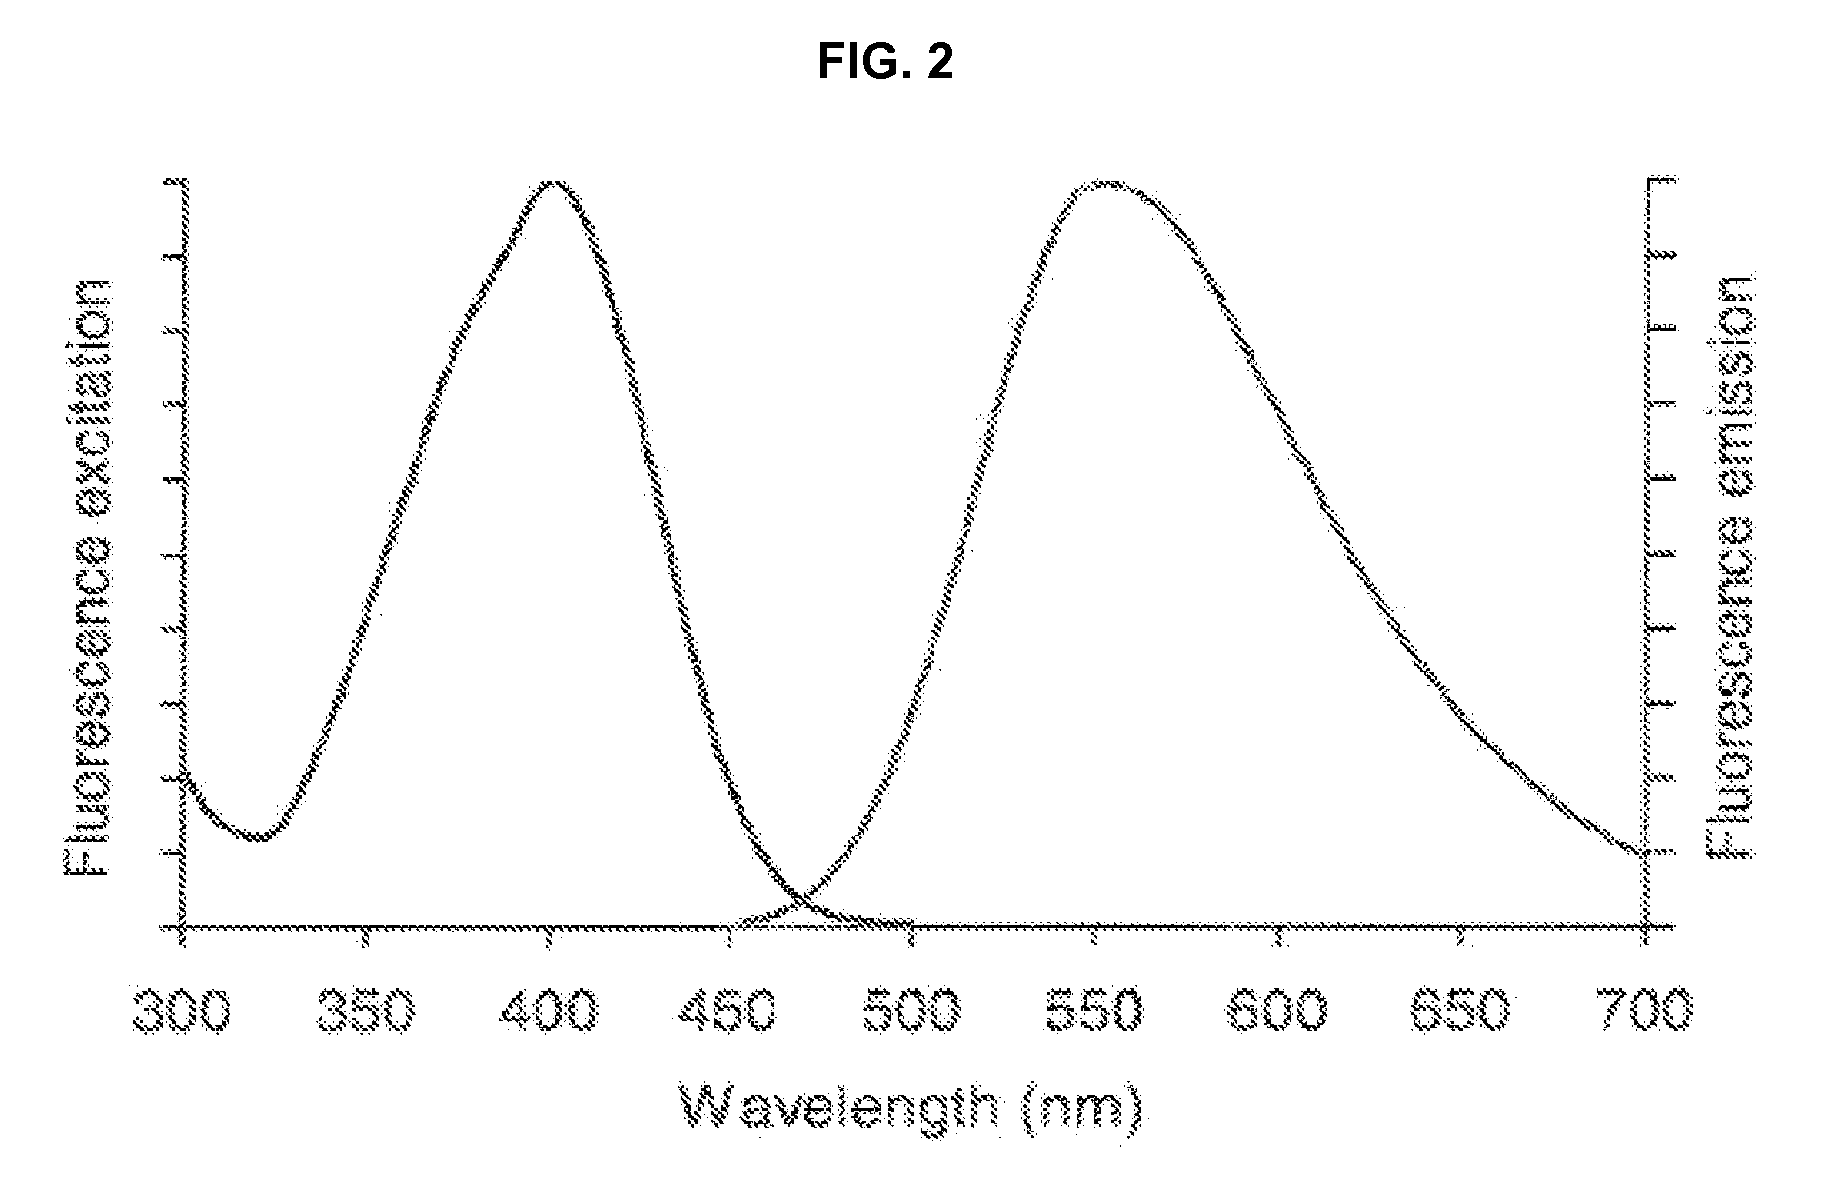 Violet laser excitable dyes and their method of use